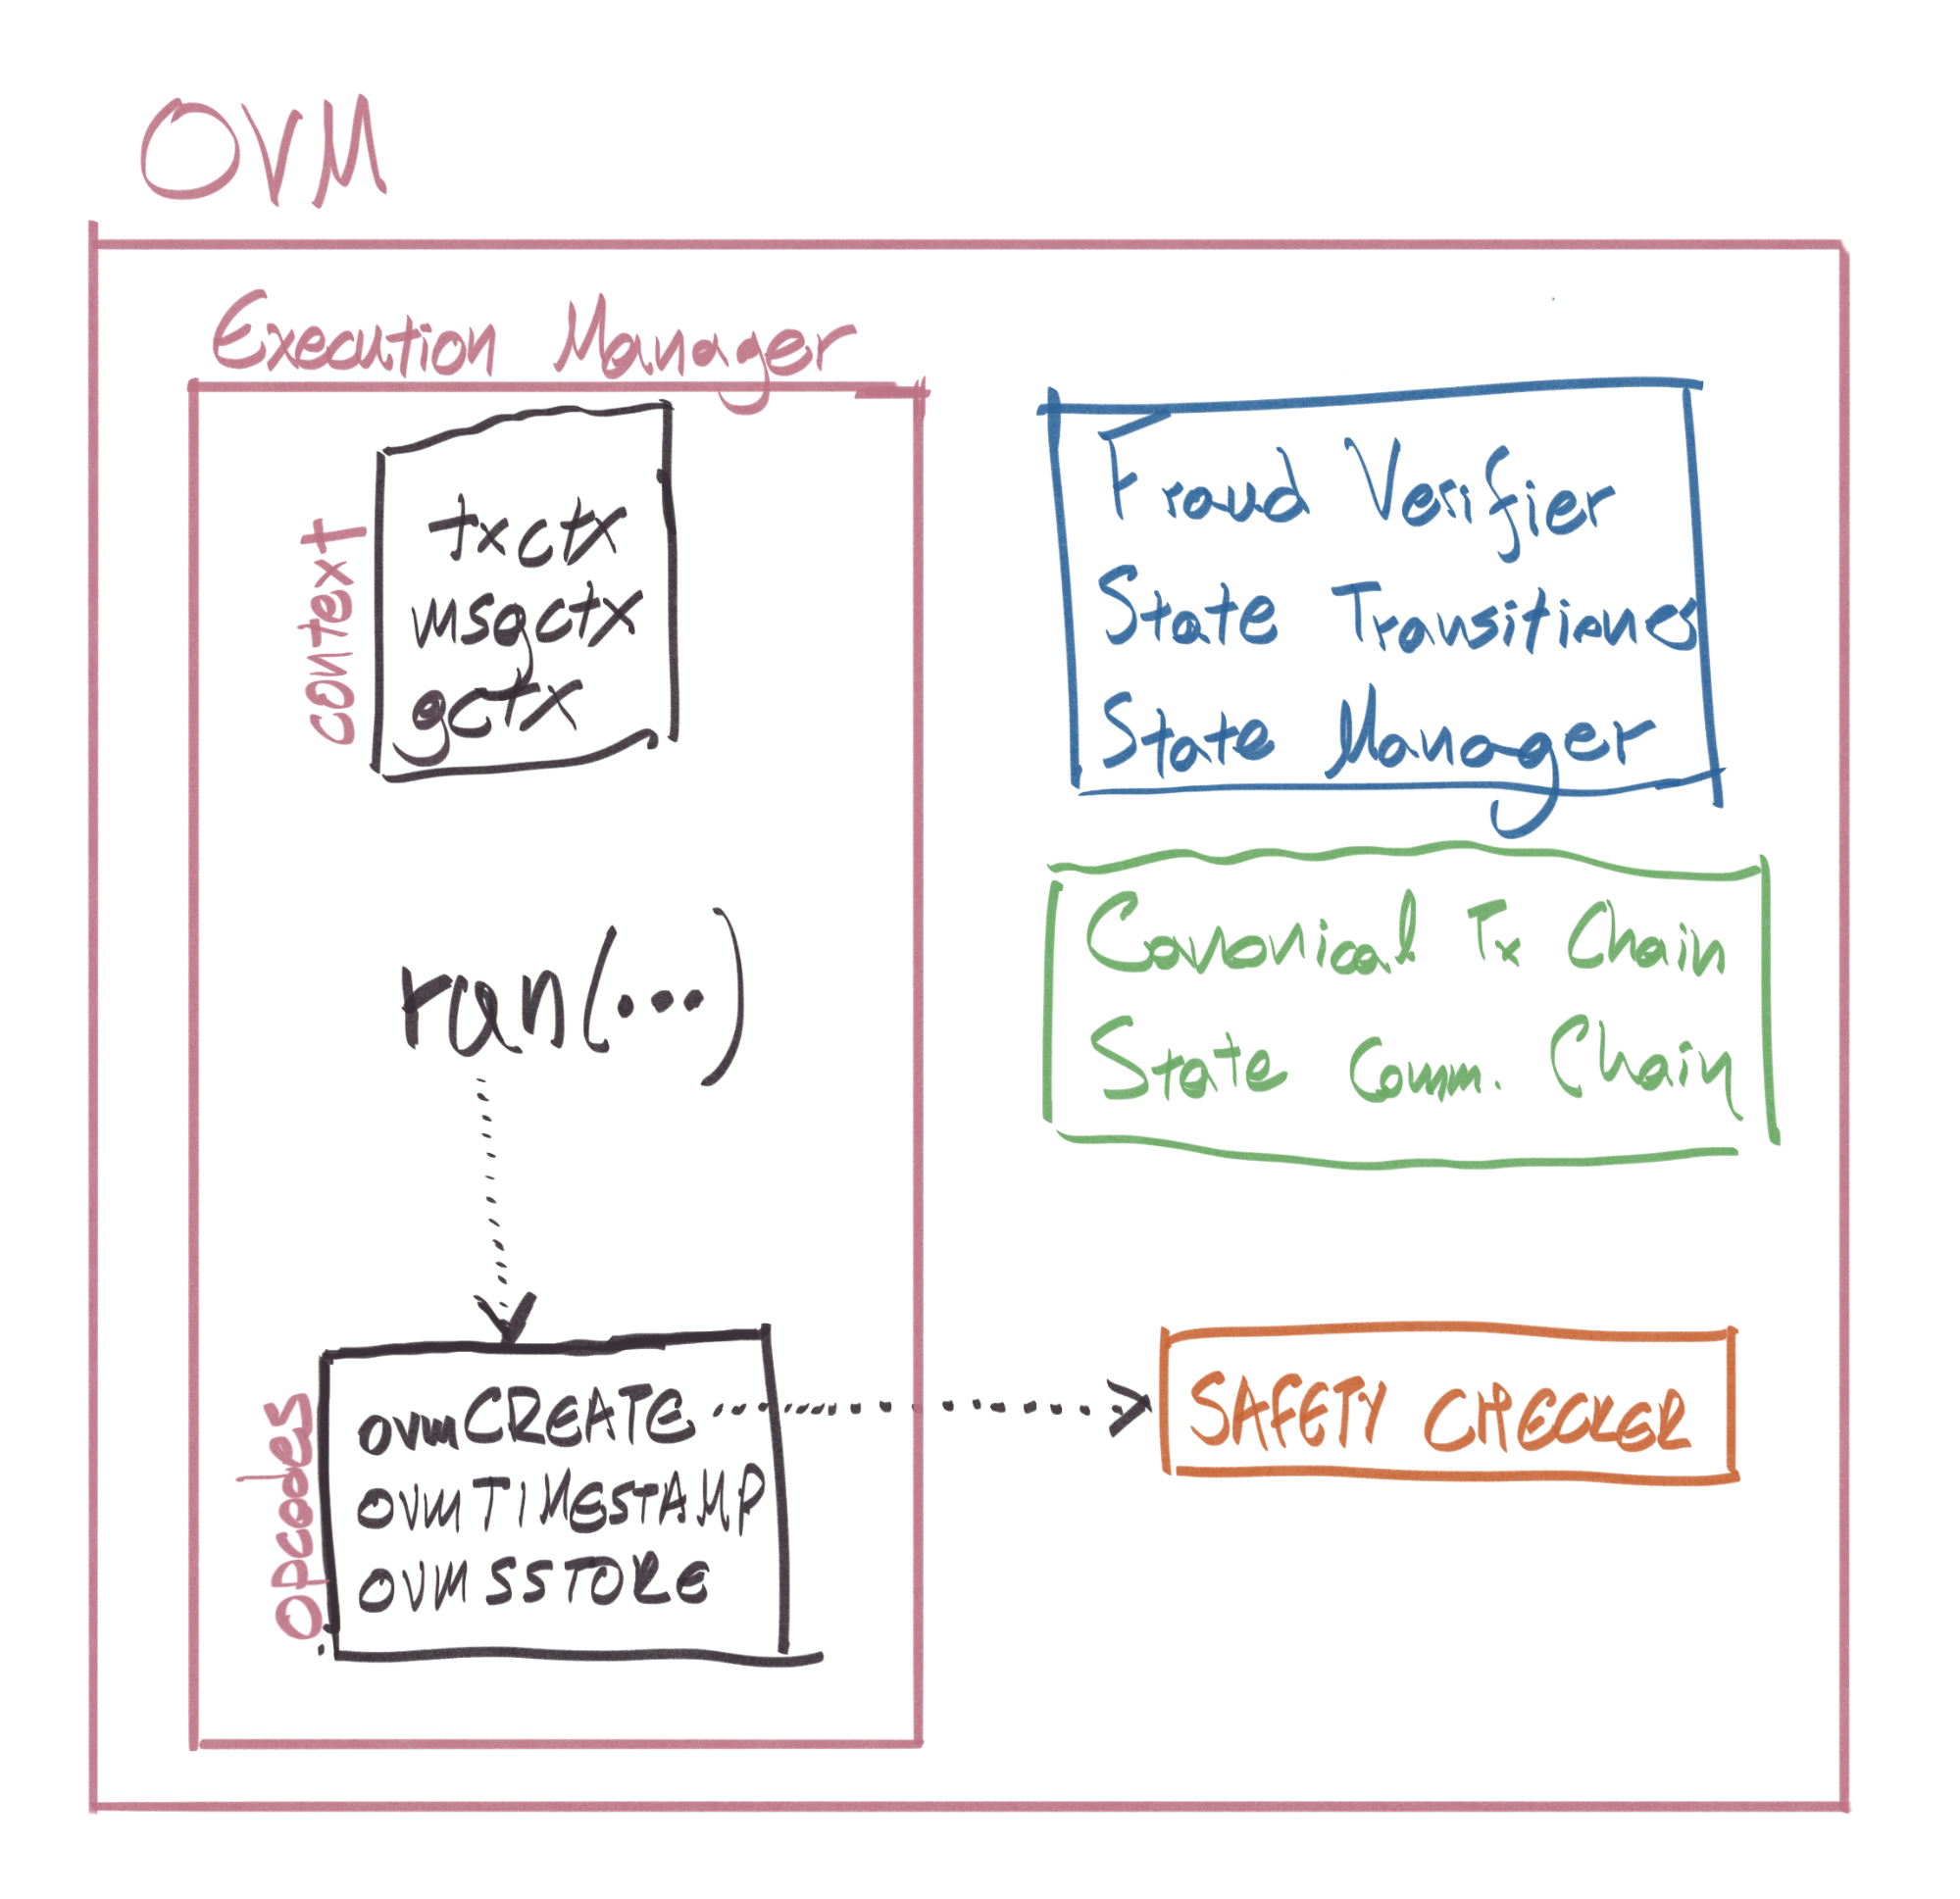 Figure 7: The OVM in Fraud Proof mode